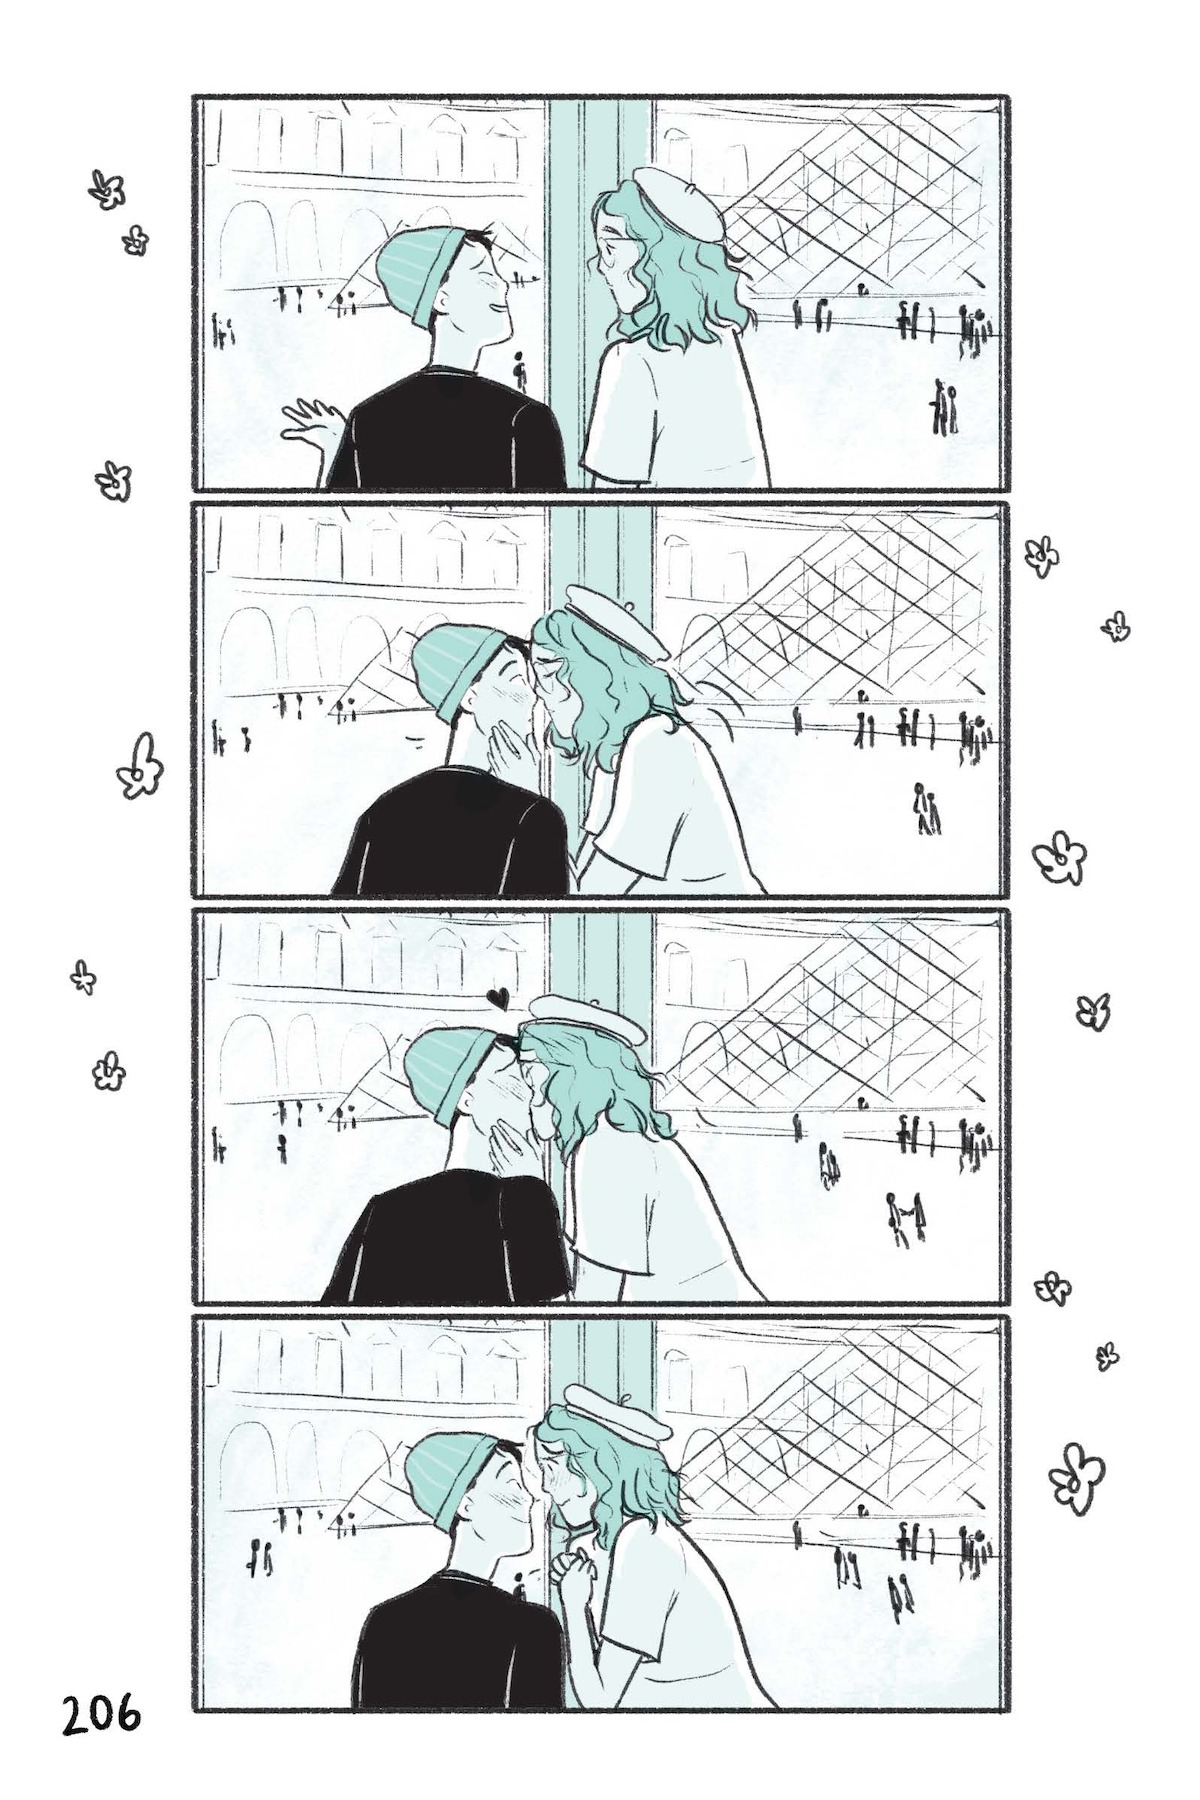 Heartstopper Season 2 Differences Between Comic and the Series